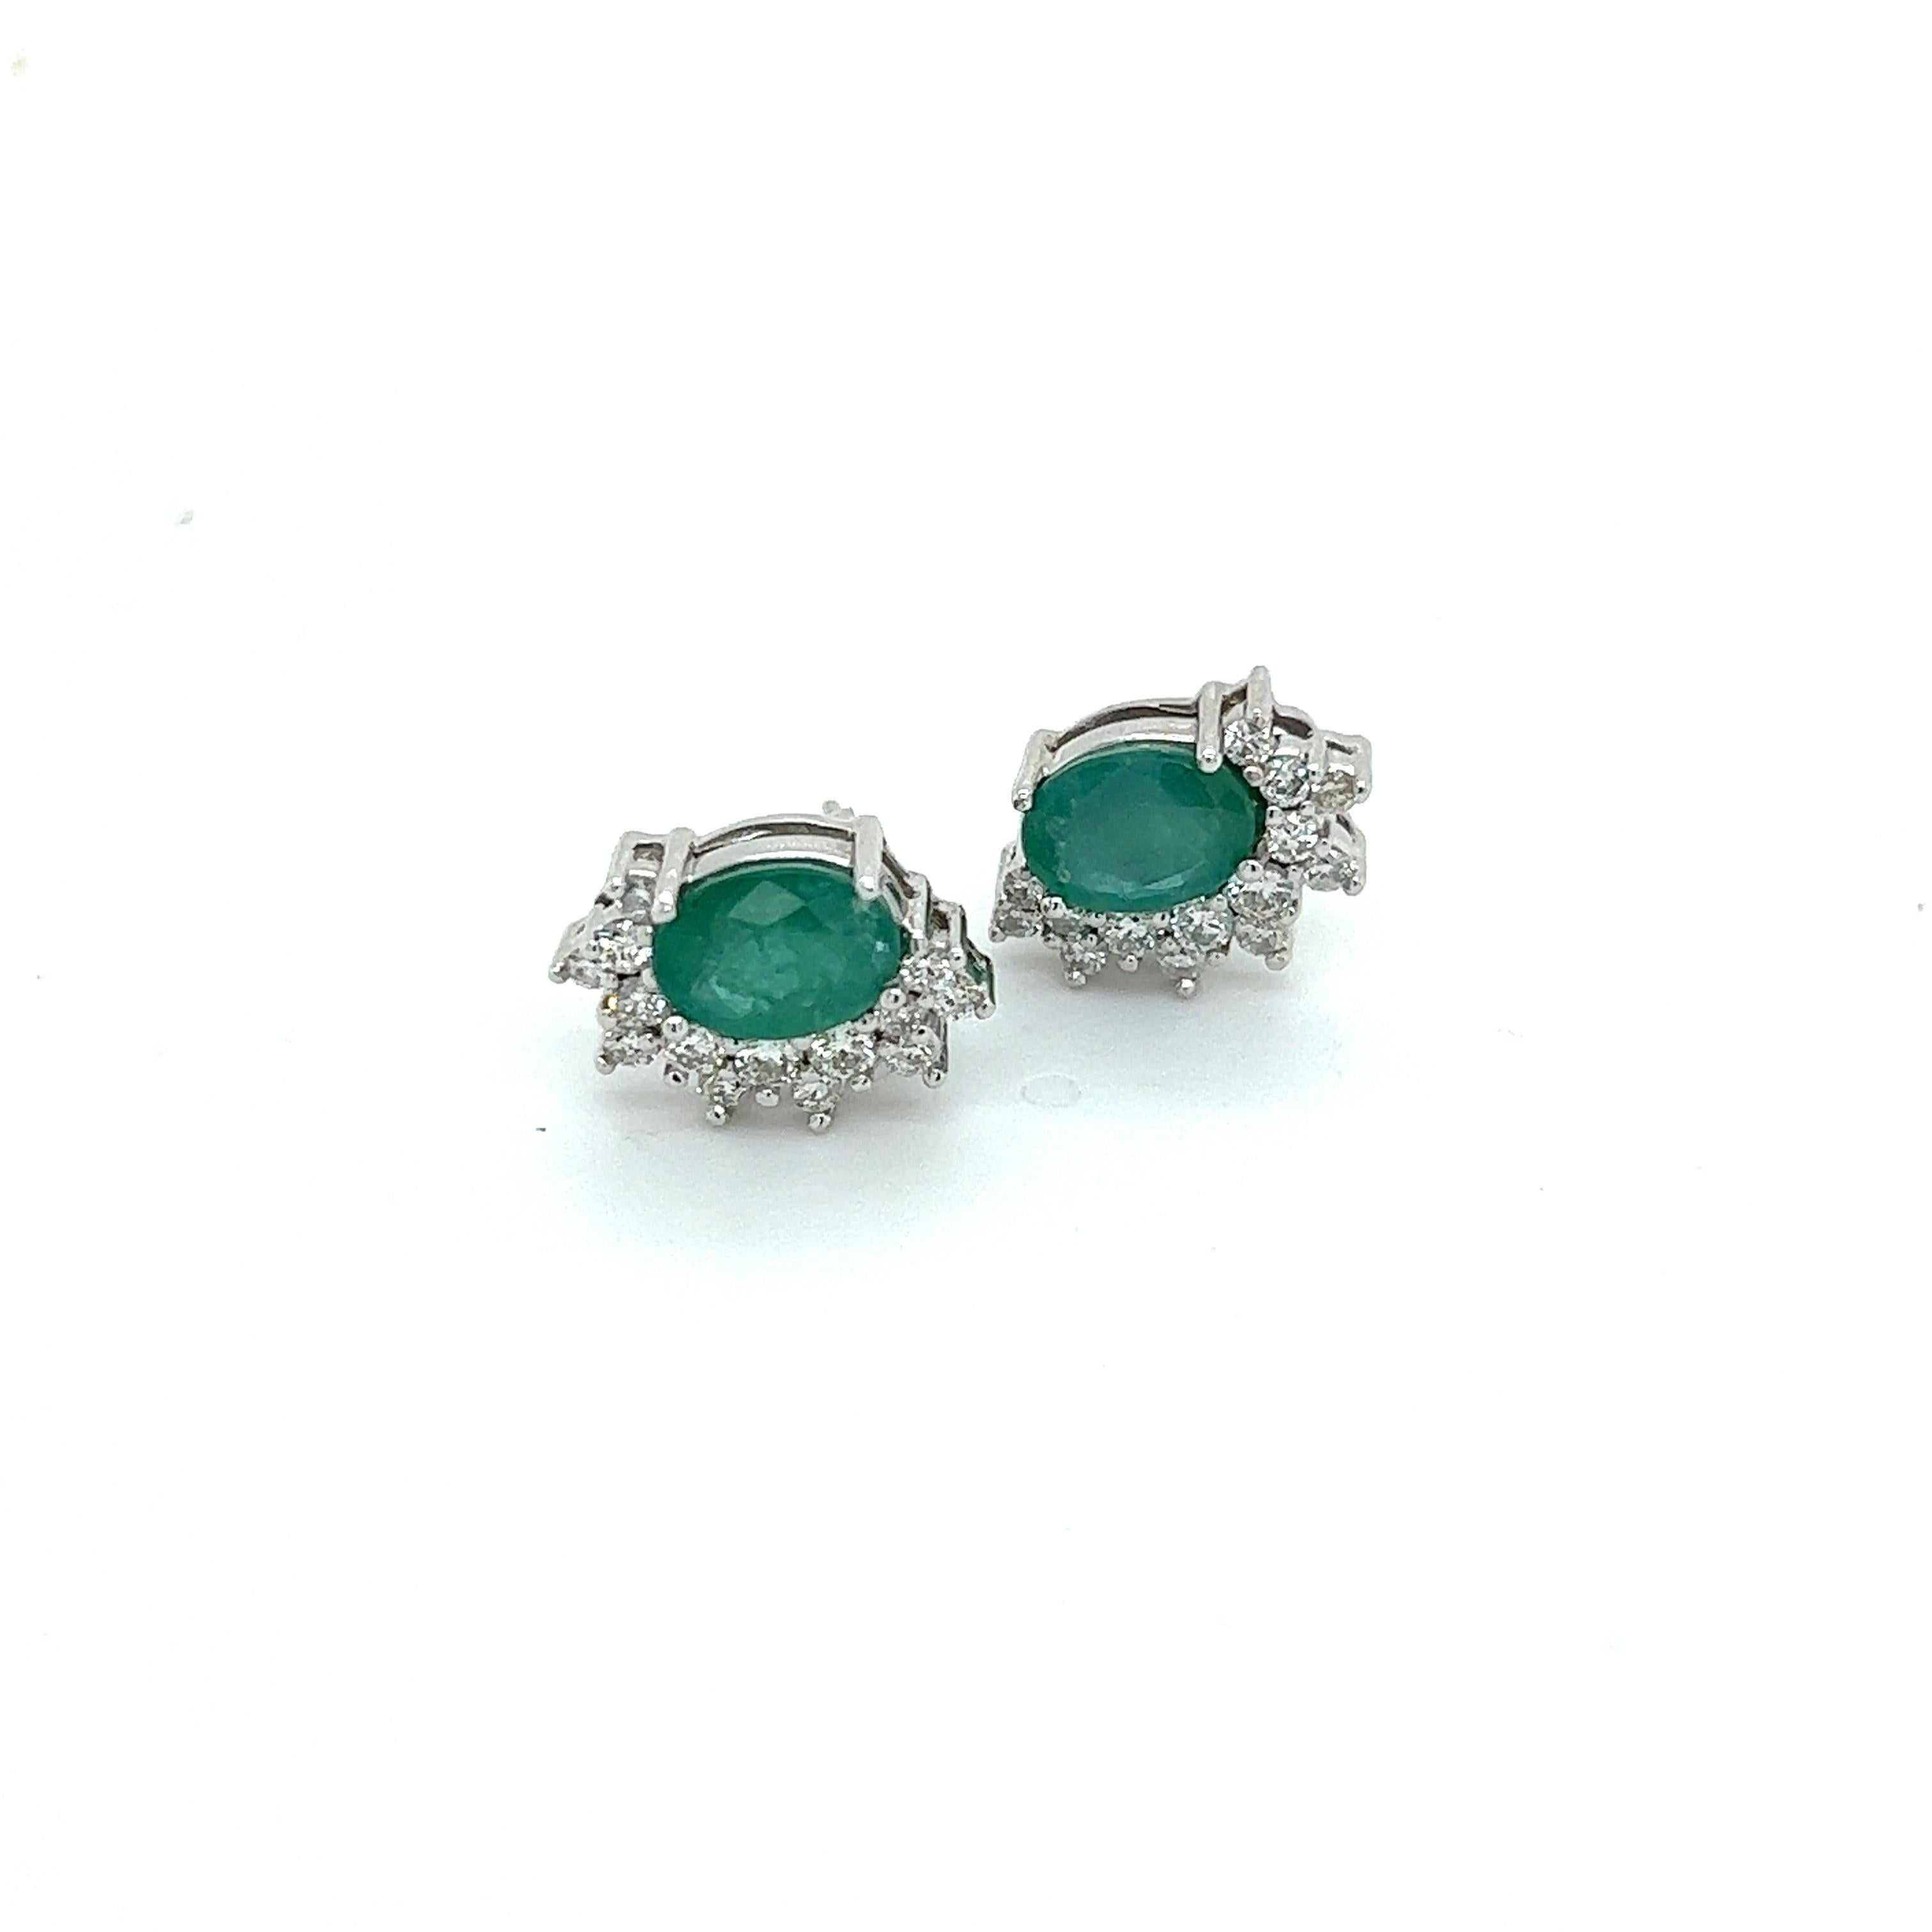 Natural Emerald Diamond Stud Earrings 14k White Gold 2.77 TCW Certified $6,950 211898

Nothing says, “I Love you” more than Diamonds and Pearls!

These Emerald earrings have been Certified, Inspected, and Appraised by Gemological Appraisal